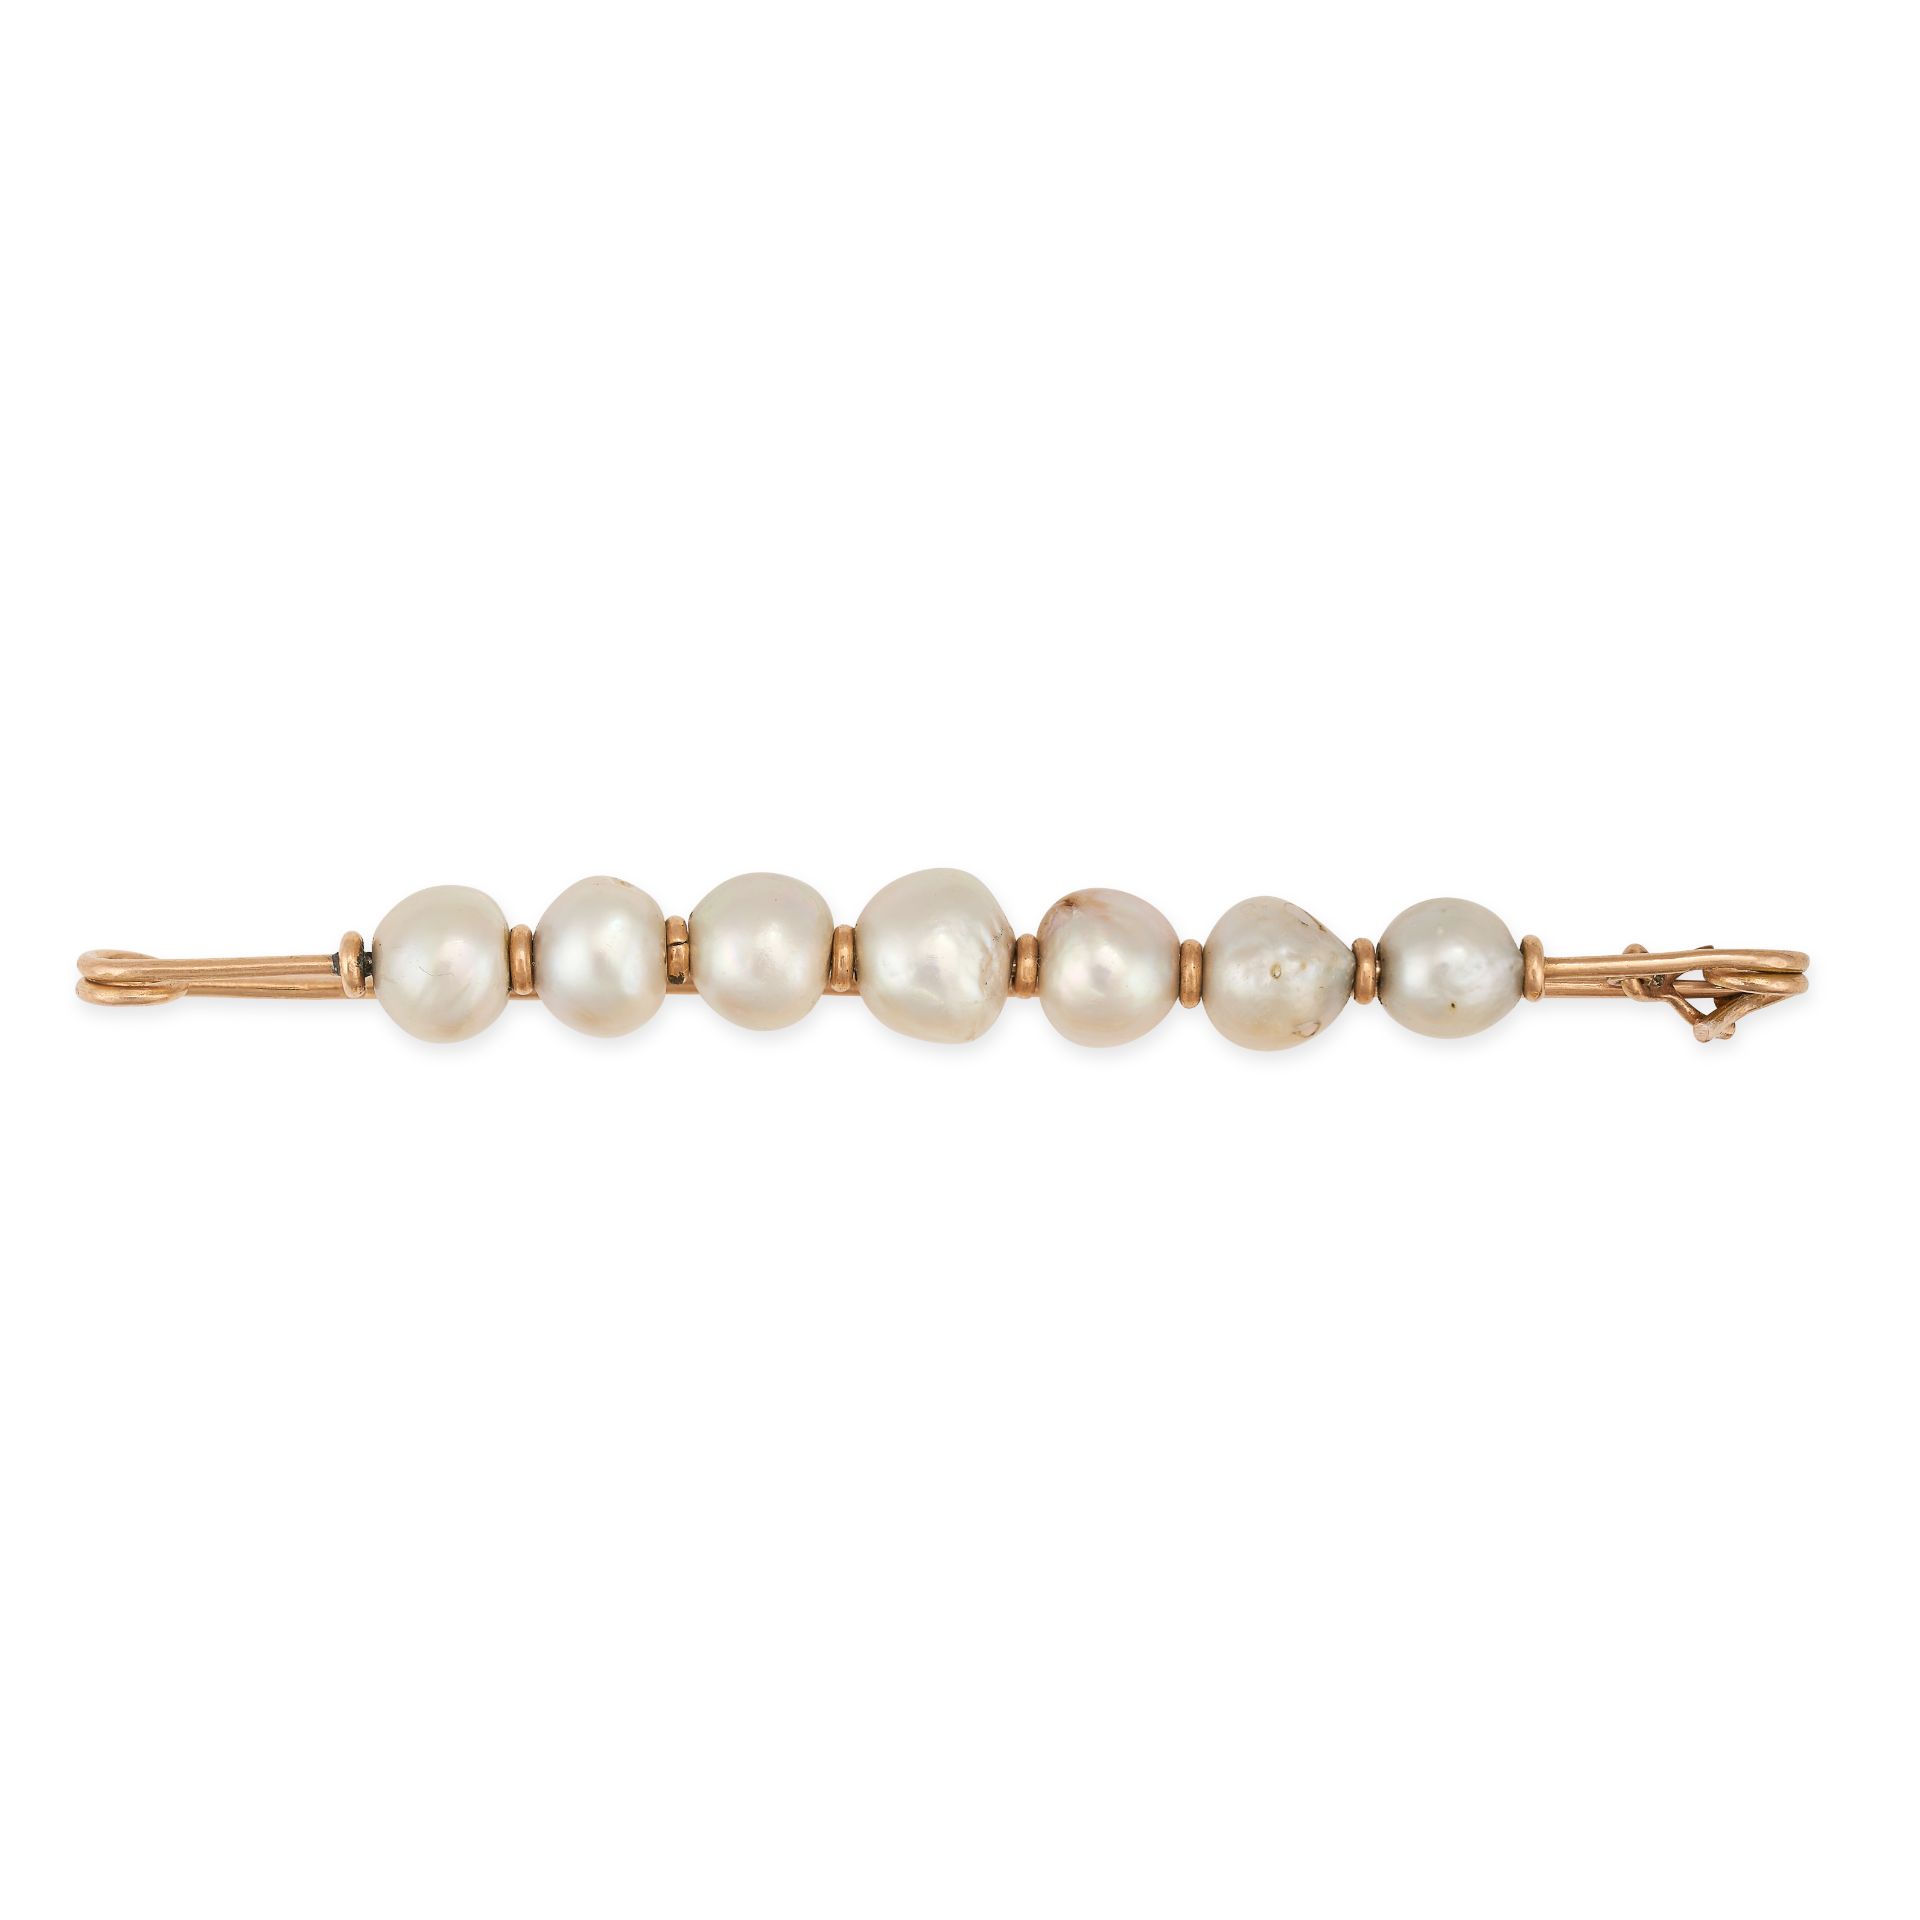 A PEARL BAR BROOCH set with a row of seven pearls, 9.1cm, 10.3g.